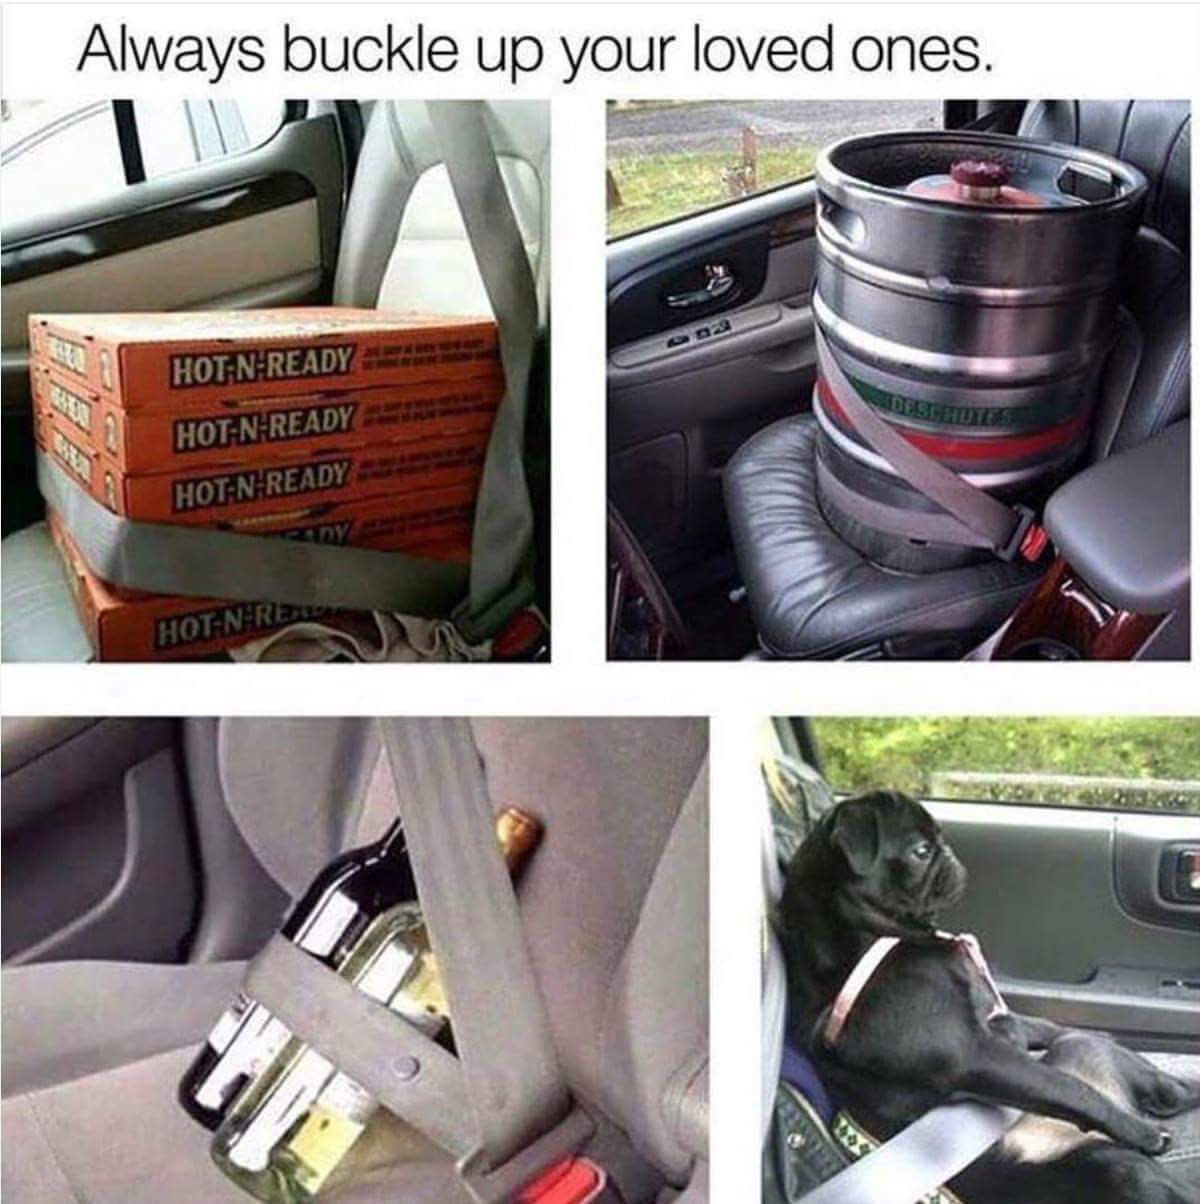 memes - always buckle up your loved ones - Always buckle up your loved ones. Destroy HotNReady HotN Ready HotNReady HotNRaus